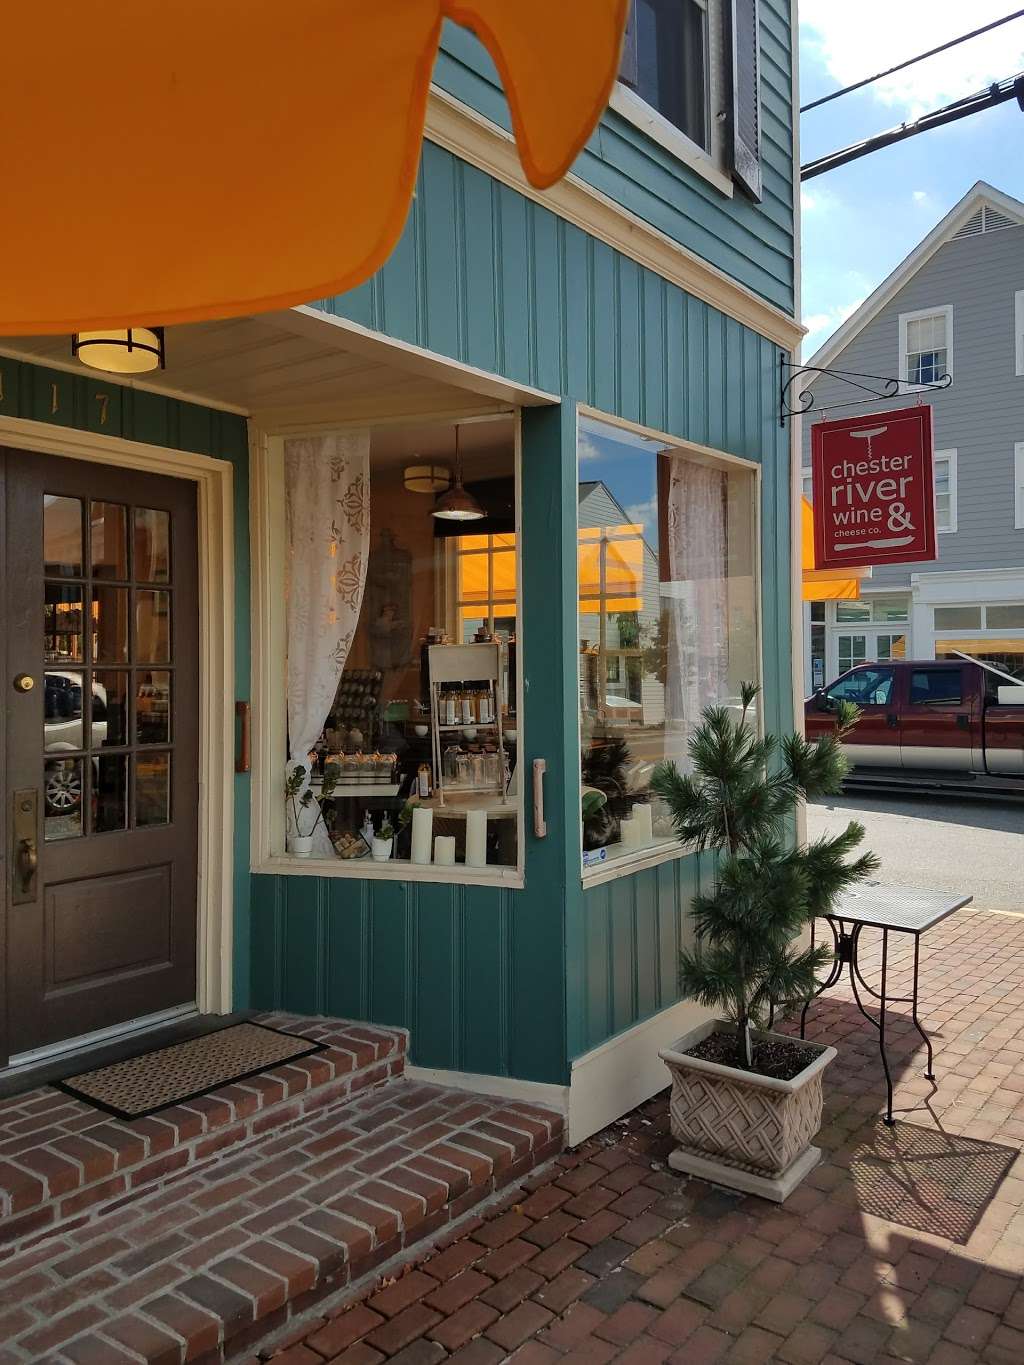 Chester River Wine & Cheese Co. | 117 S Cross St, Chestertown, MD 21620 | Phone: (443) 282-0220